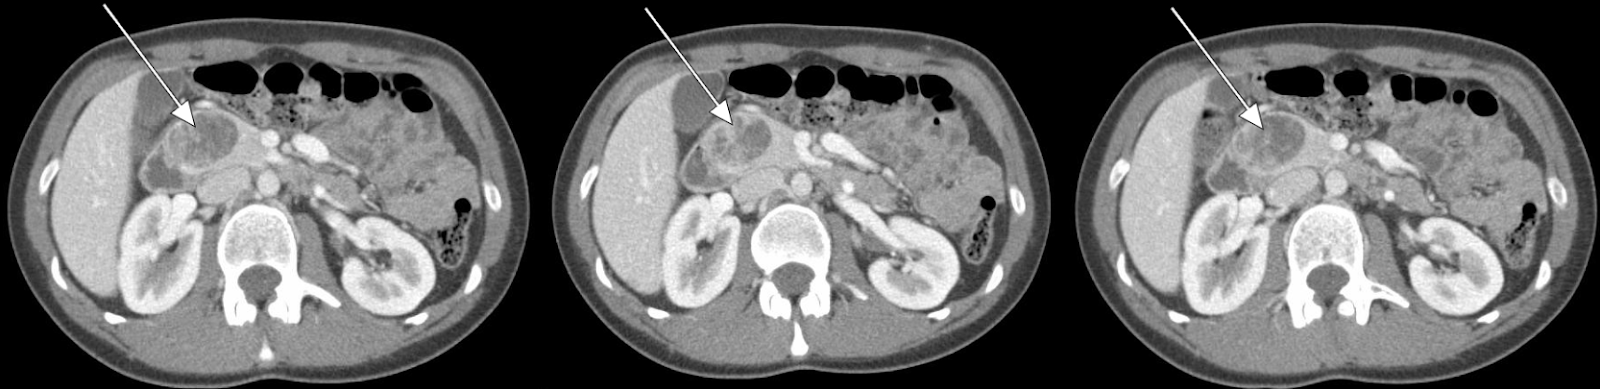 Abdominal CT revealing a 3.5-cm enhancing lesion associated with the head of the pancreas.